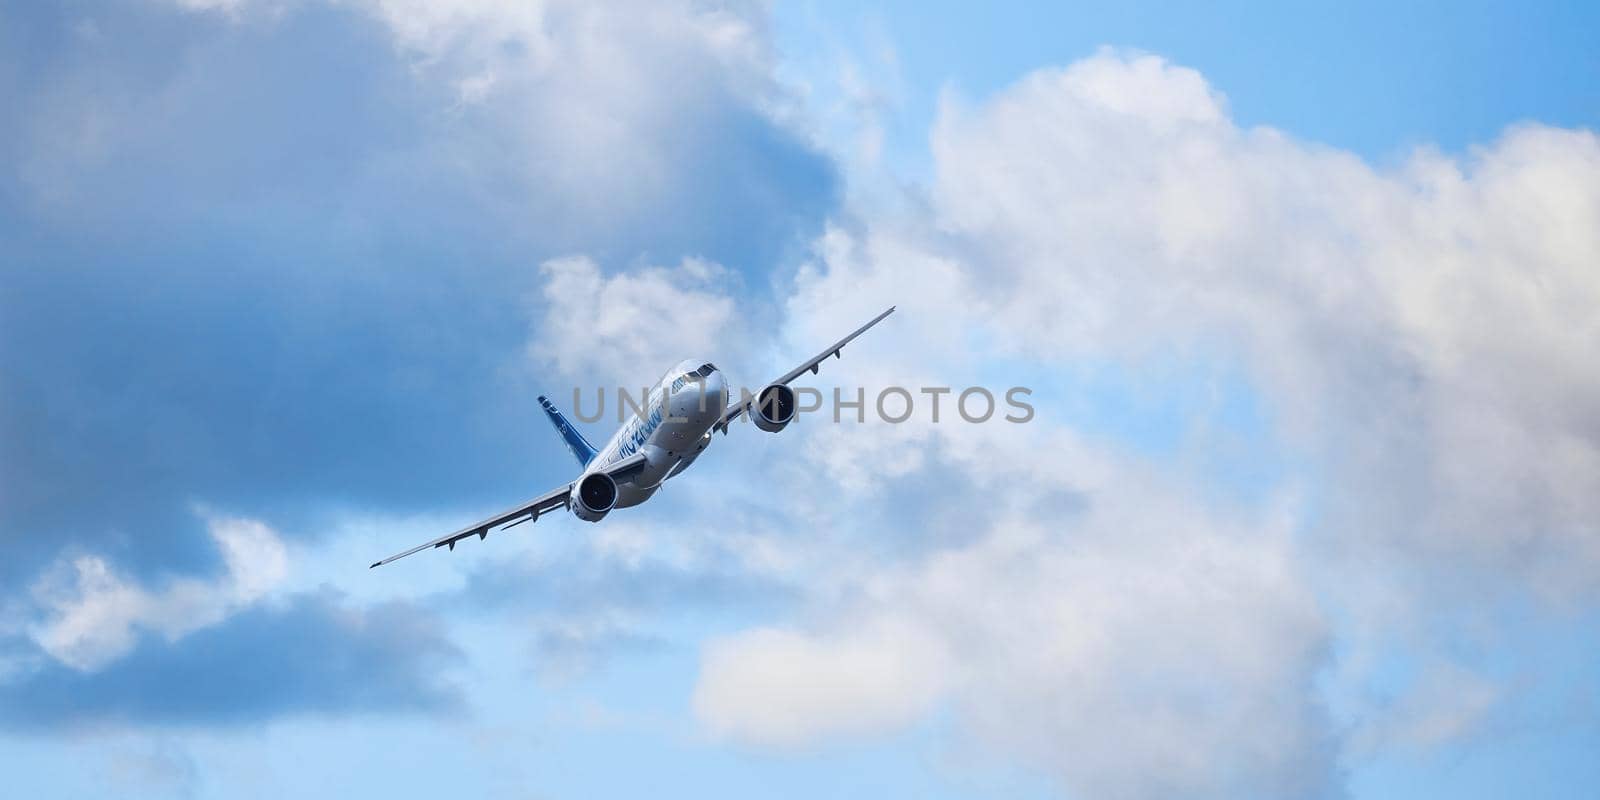 New Russian passenger aircraft MS-21-300 flying prototype of a new Russian civil airliner during test flights on MAKS 2019 airshow. ZHUKOVSKY, RUSSIA, AUGUST 29, 2019 by EvgeniyQW